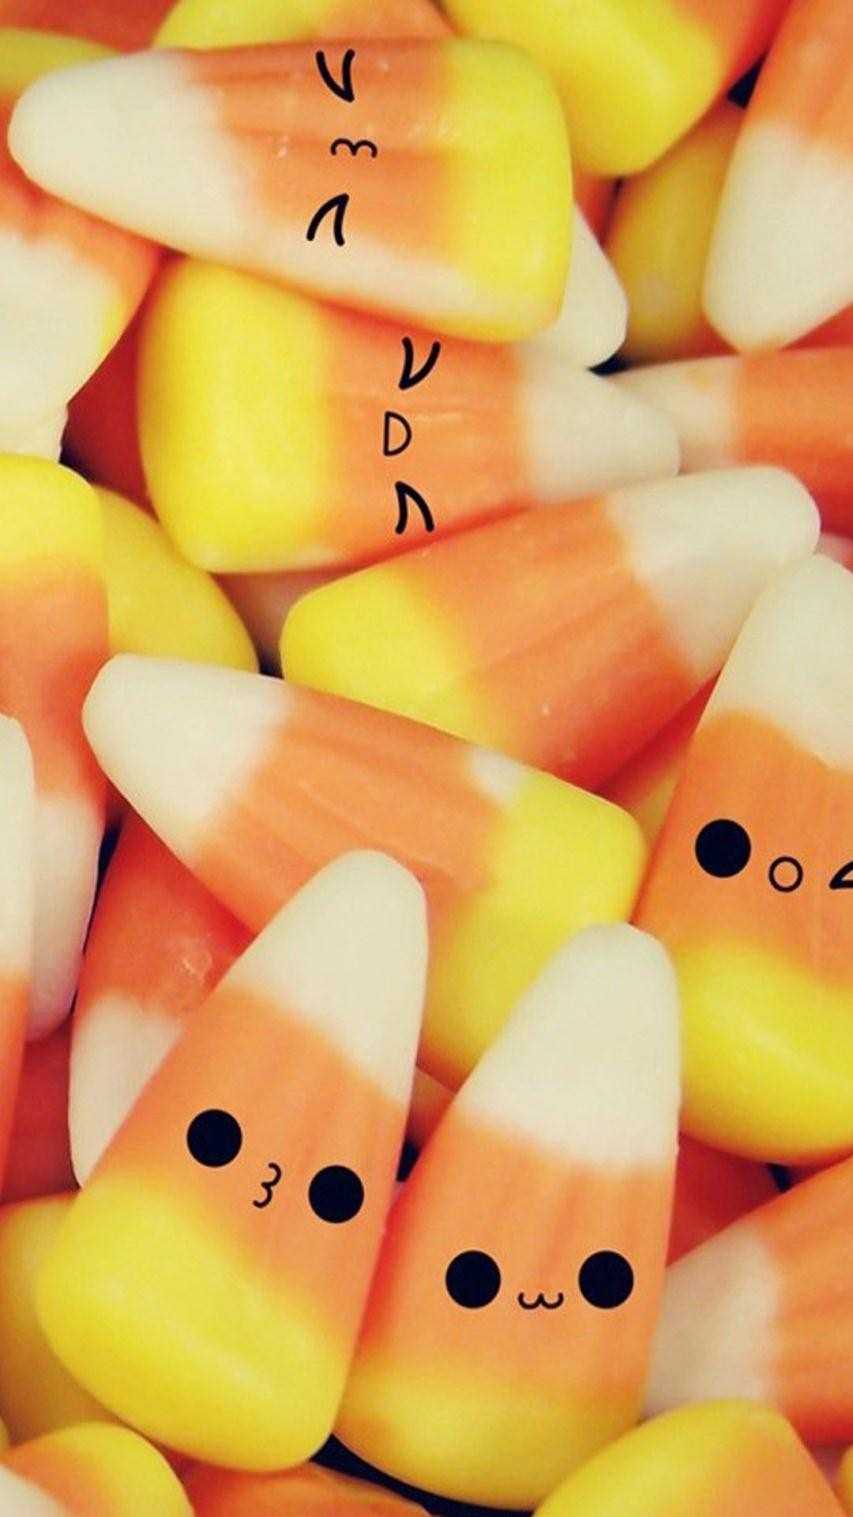 Cute Candy Corn Background iPhone Girly Wallpaper For Mobile Phones